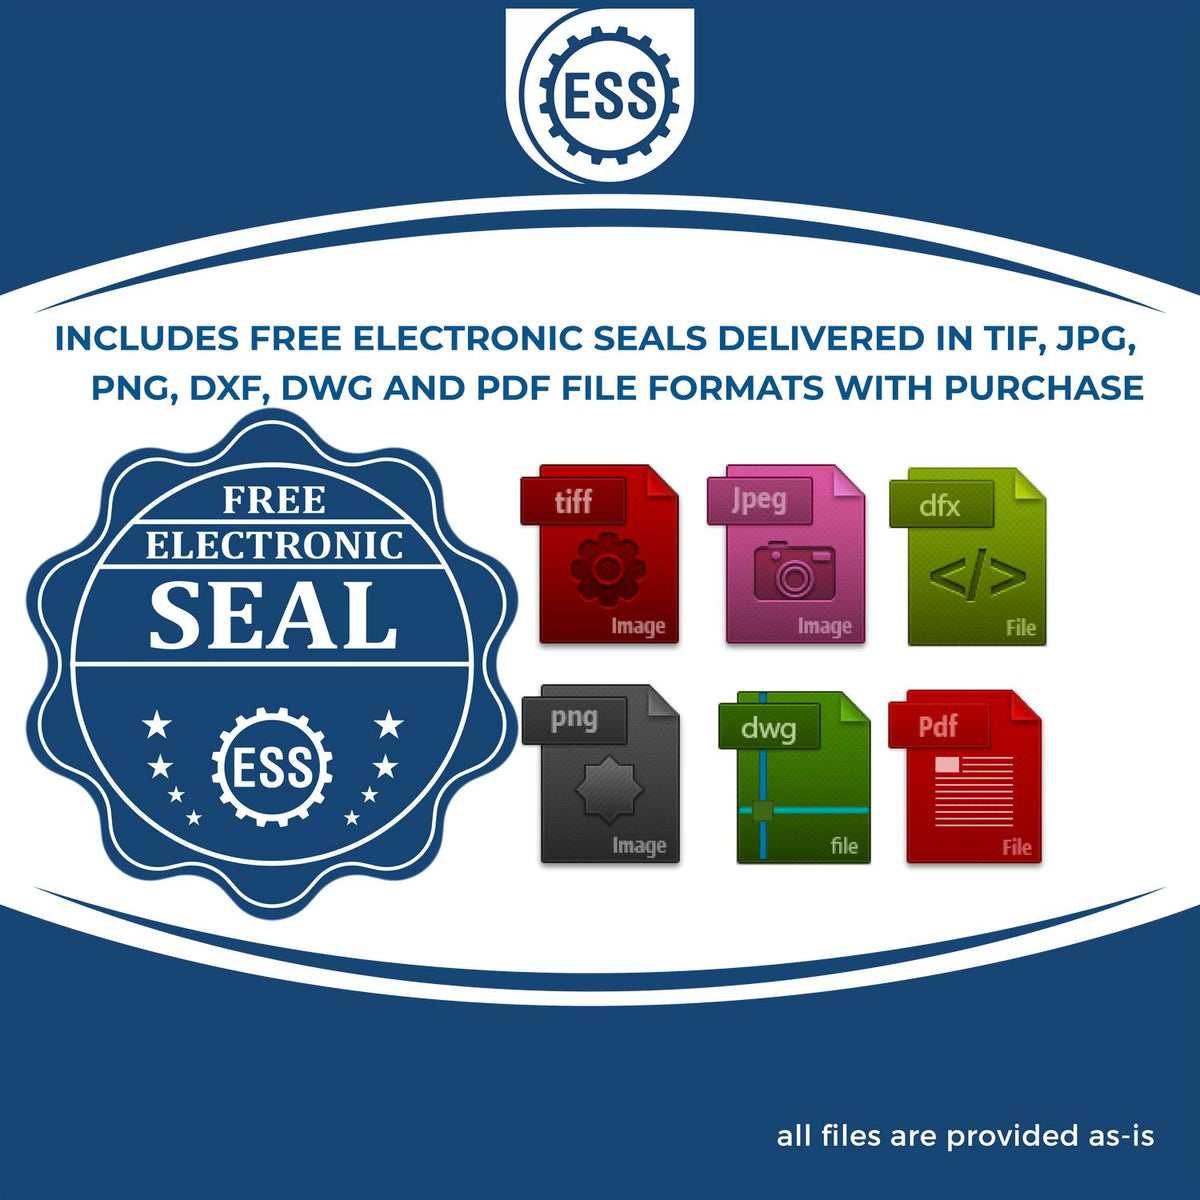 An infographic for the free electronic seal for the Tennessee Engineer Desk Seal illustrating the different file type icons such as DXF, DWG, TIF, JPG and PNG.